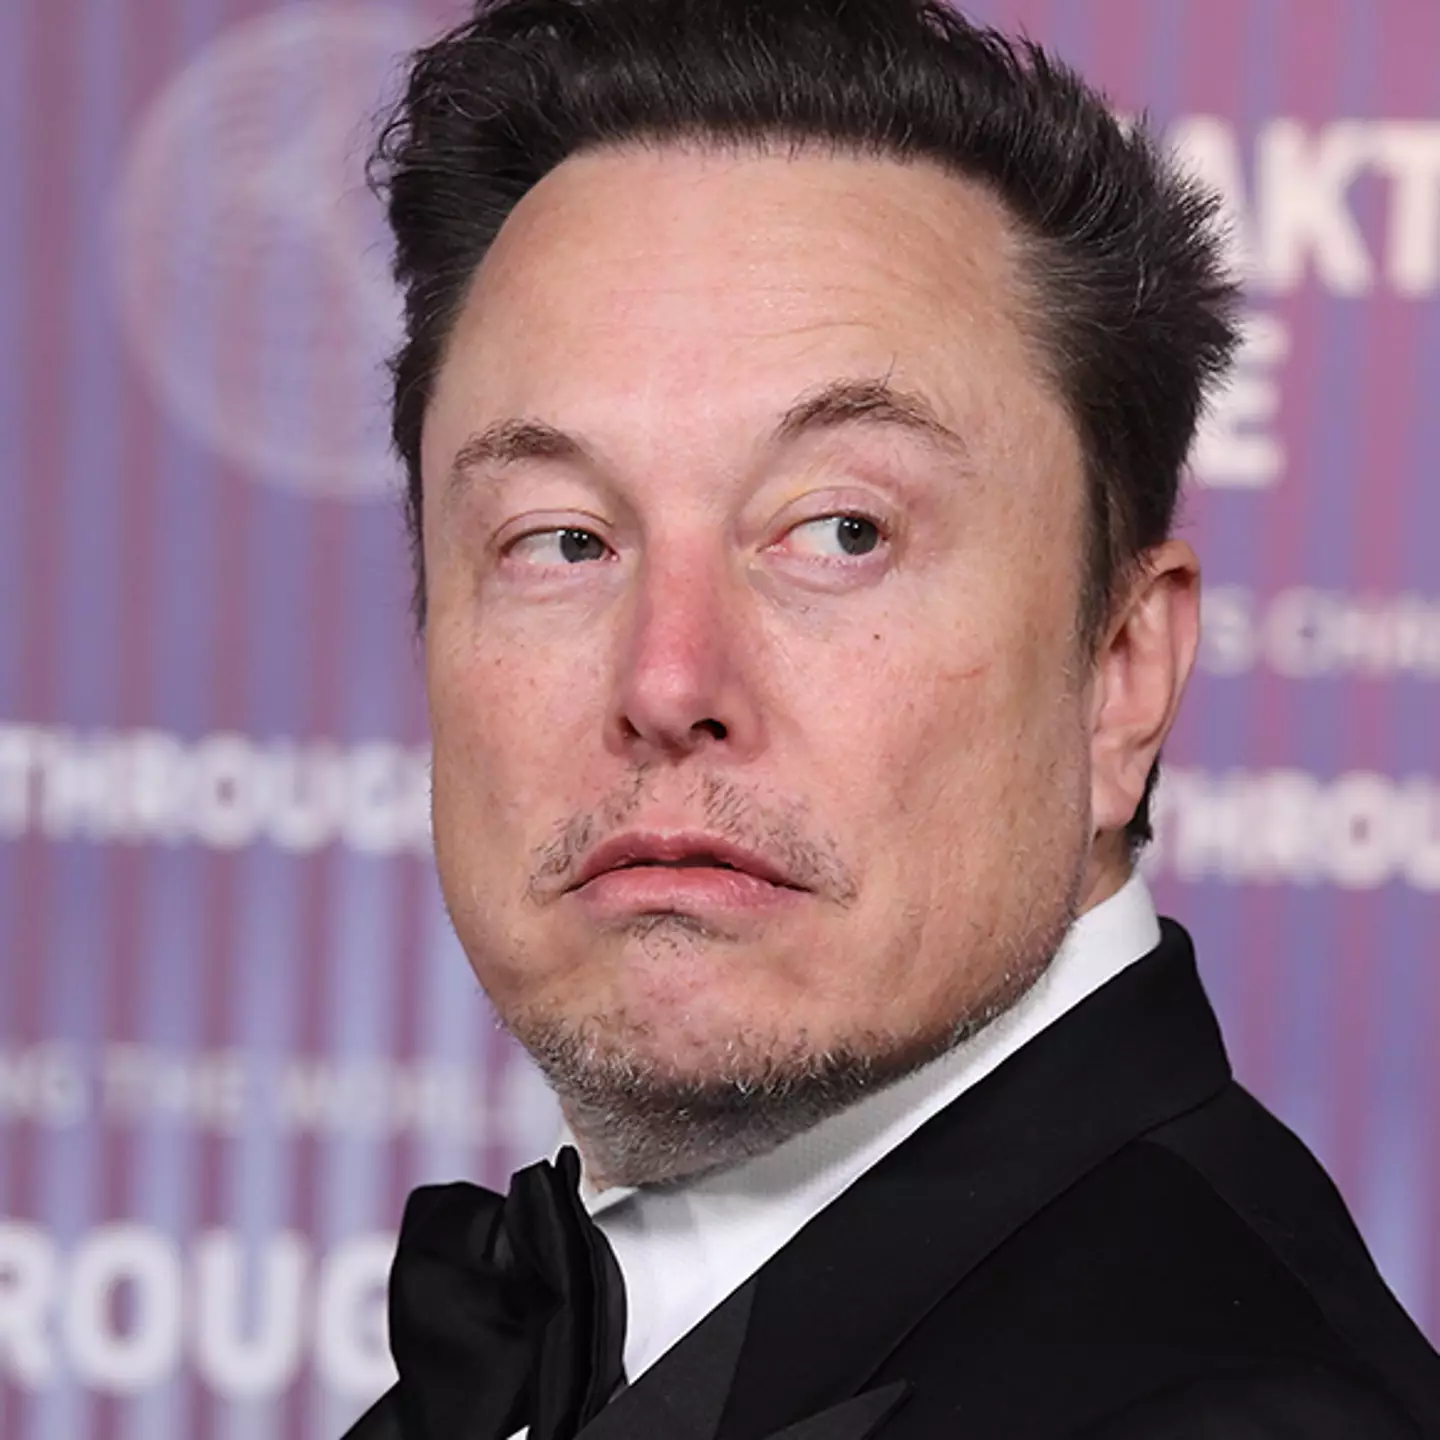 Tesla reportedly cutting 14,000 jobs as Elon Musk aims to reshape business as ‘lean and hungry’